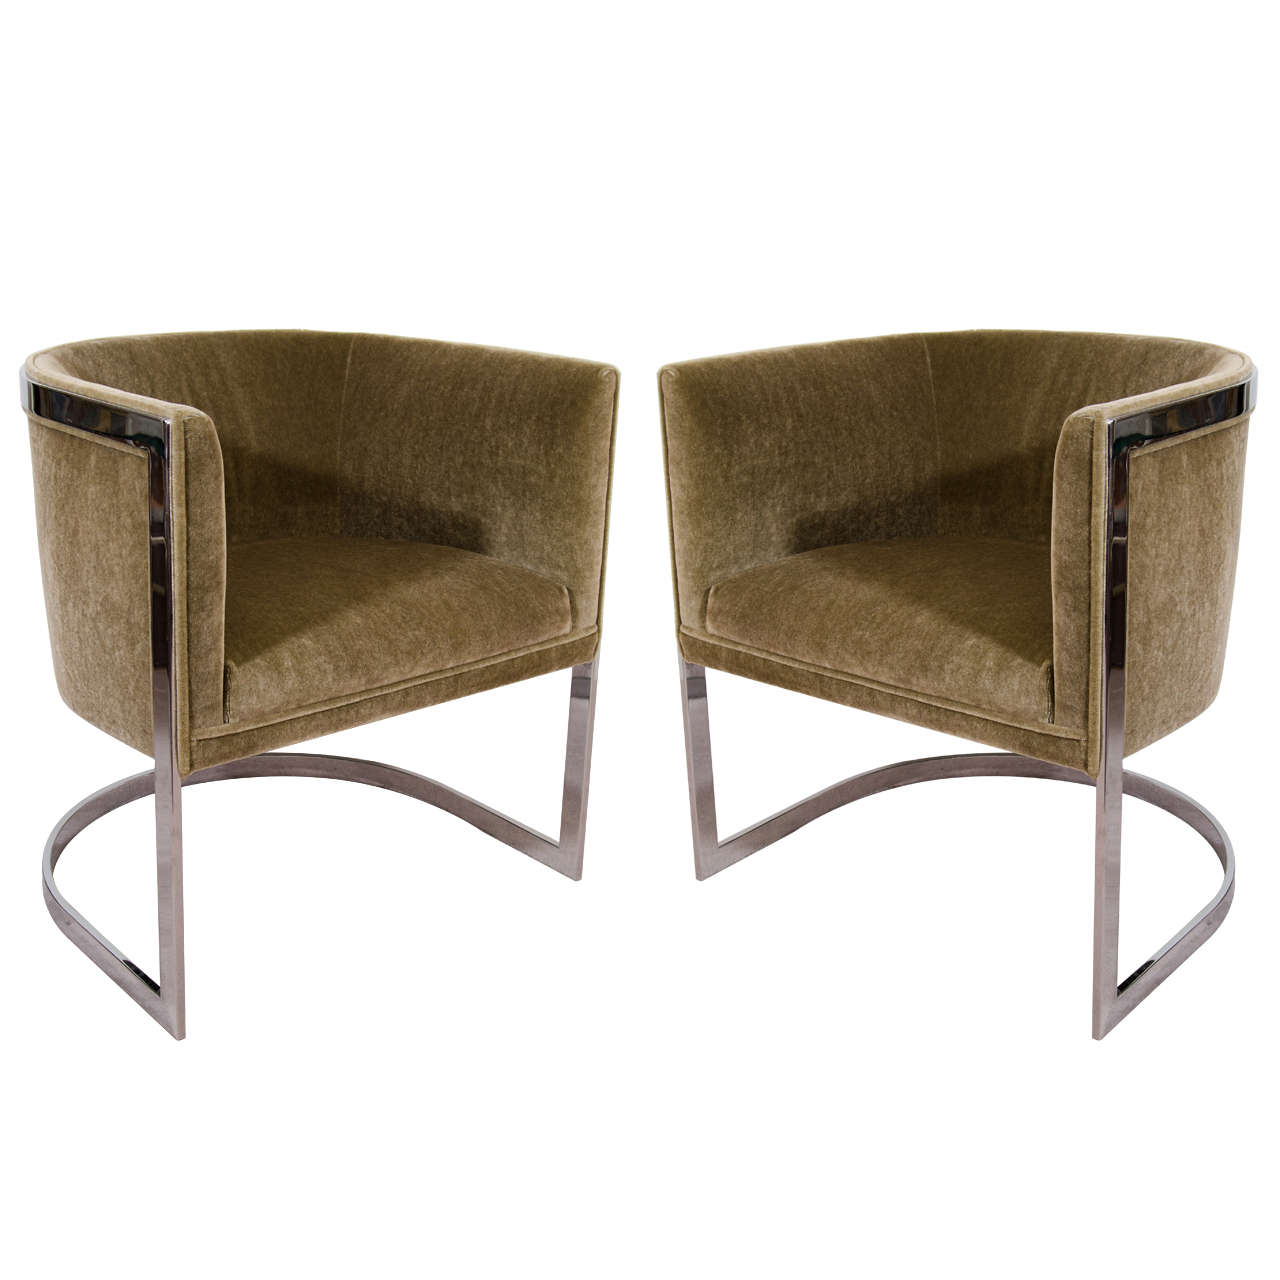 A Mid-Century Pair of Chrome Tub Chairs Attributed to Milo Baughman